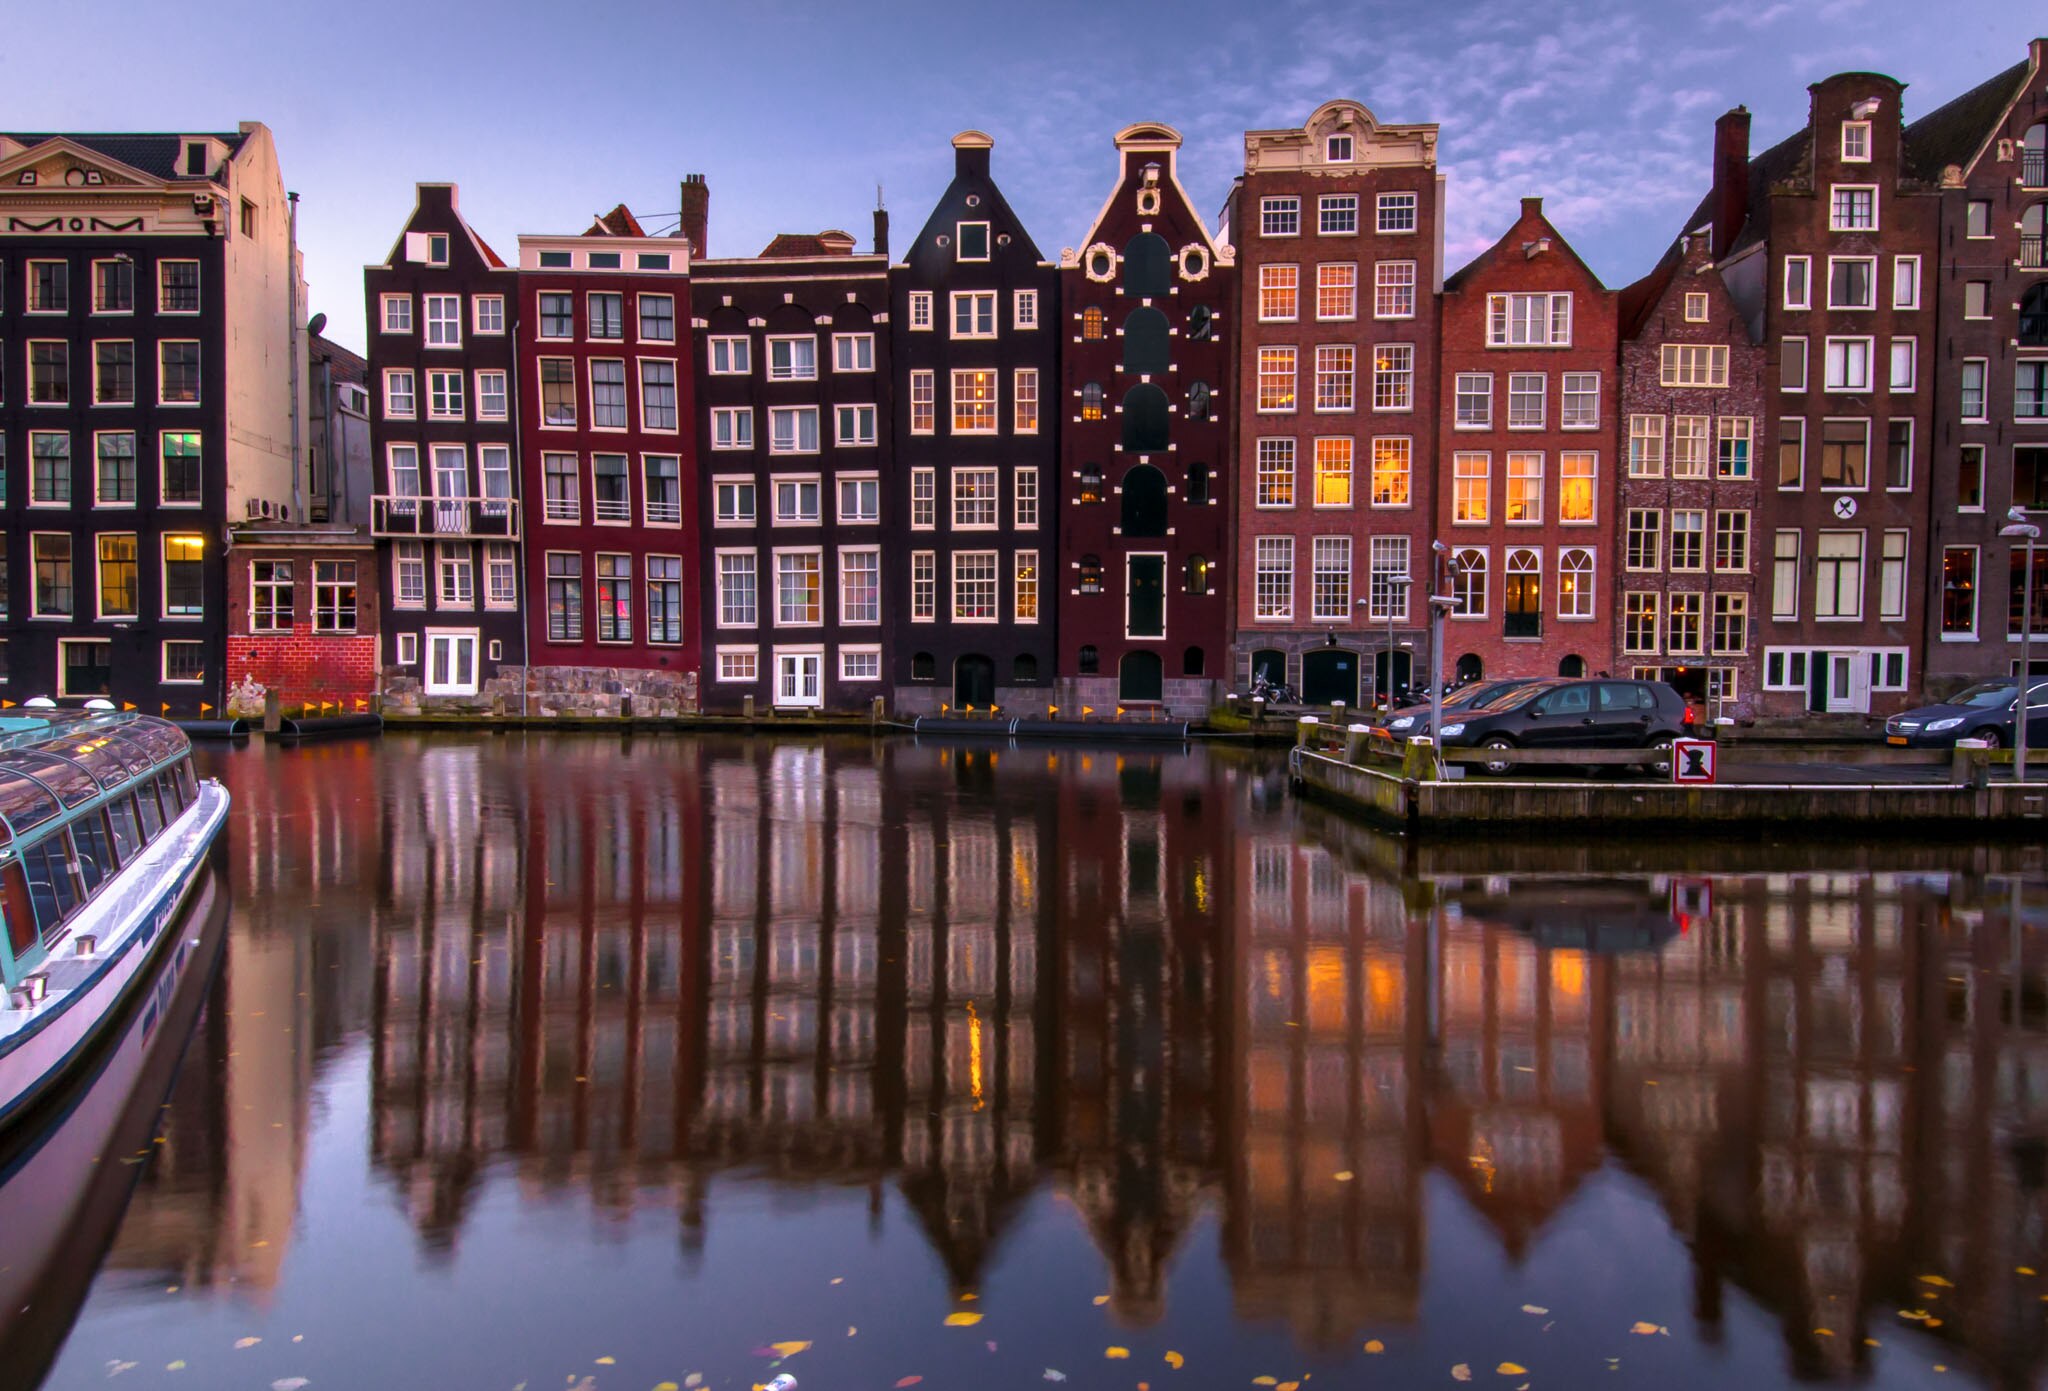 The Amstel